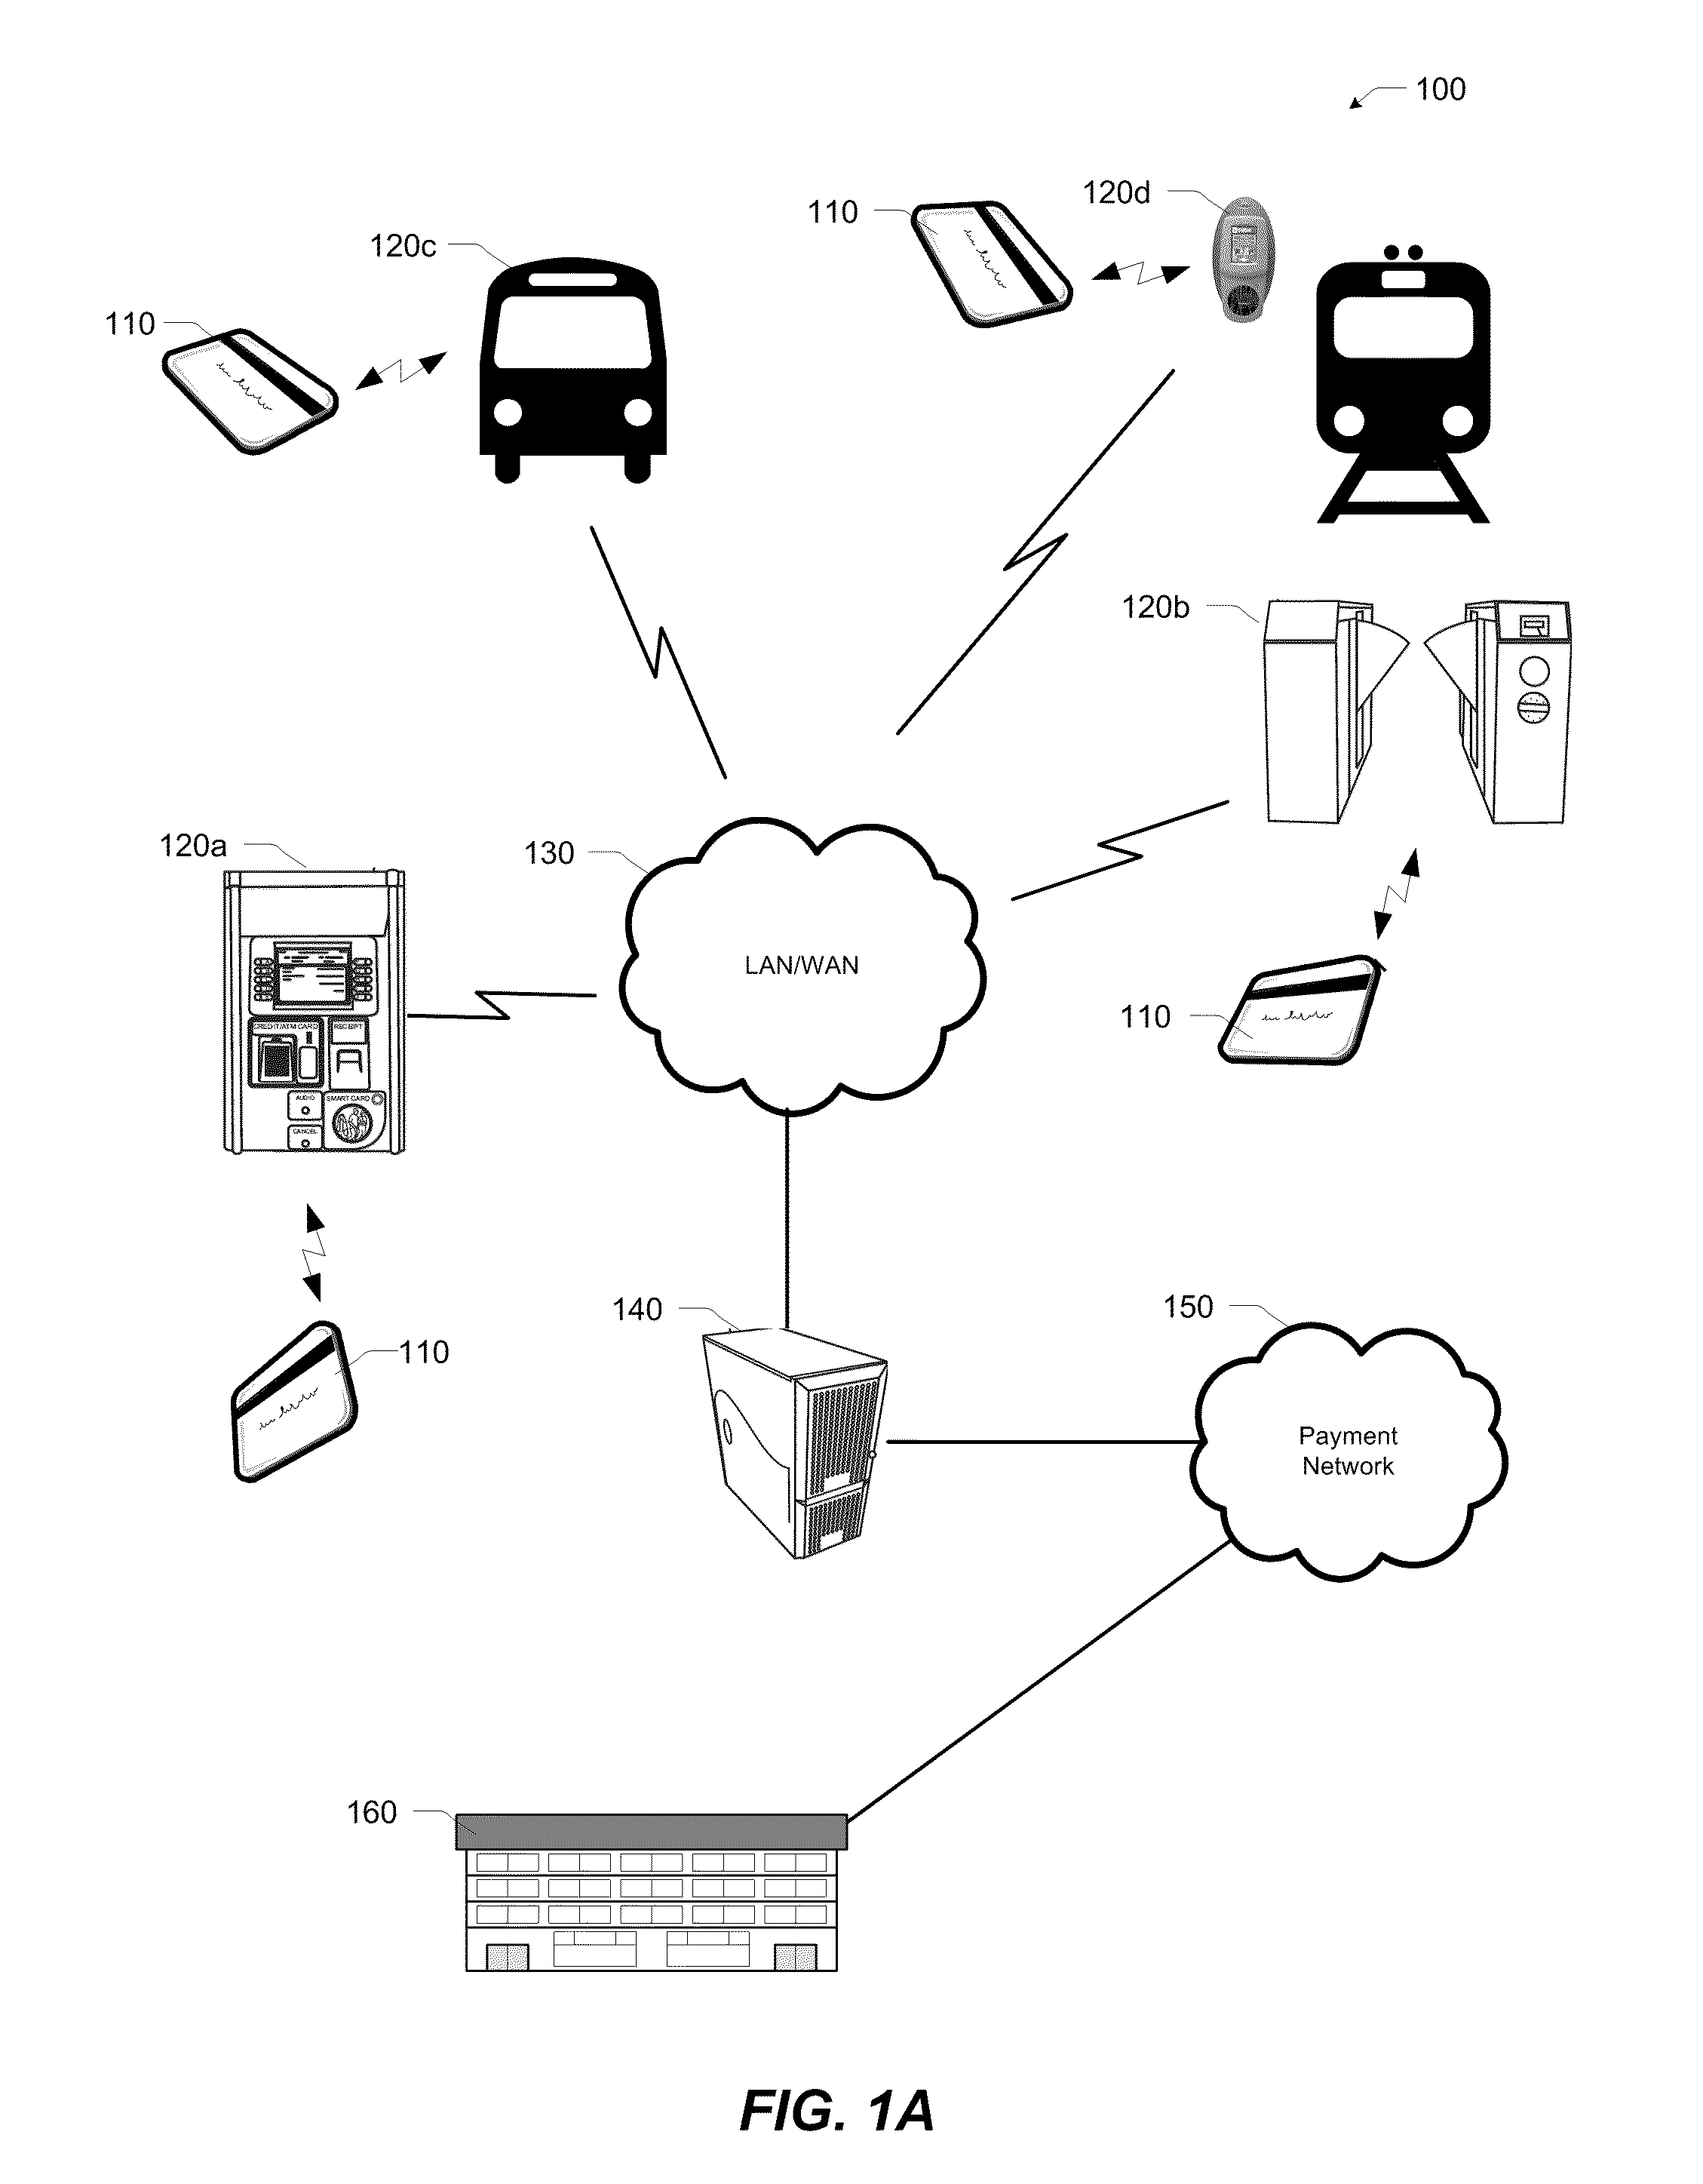 Proxy-based payment system